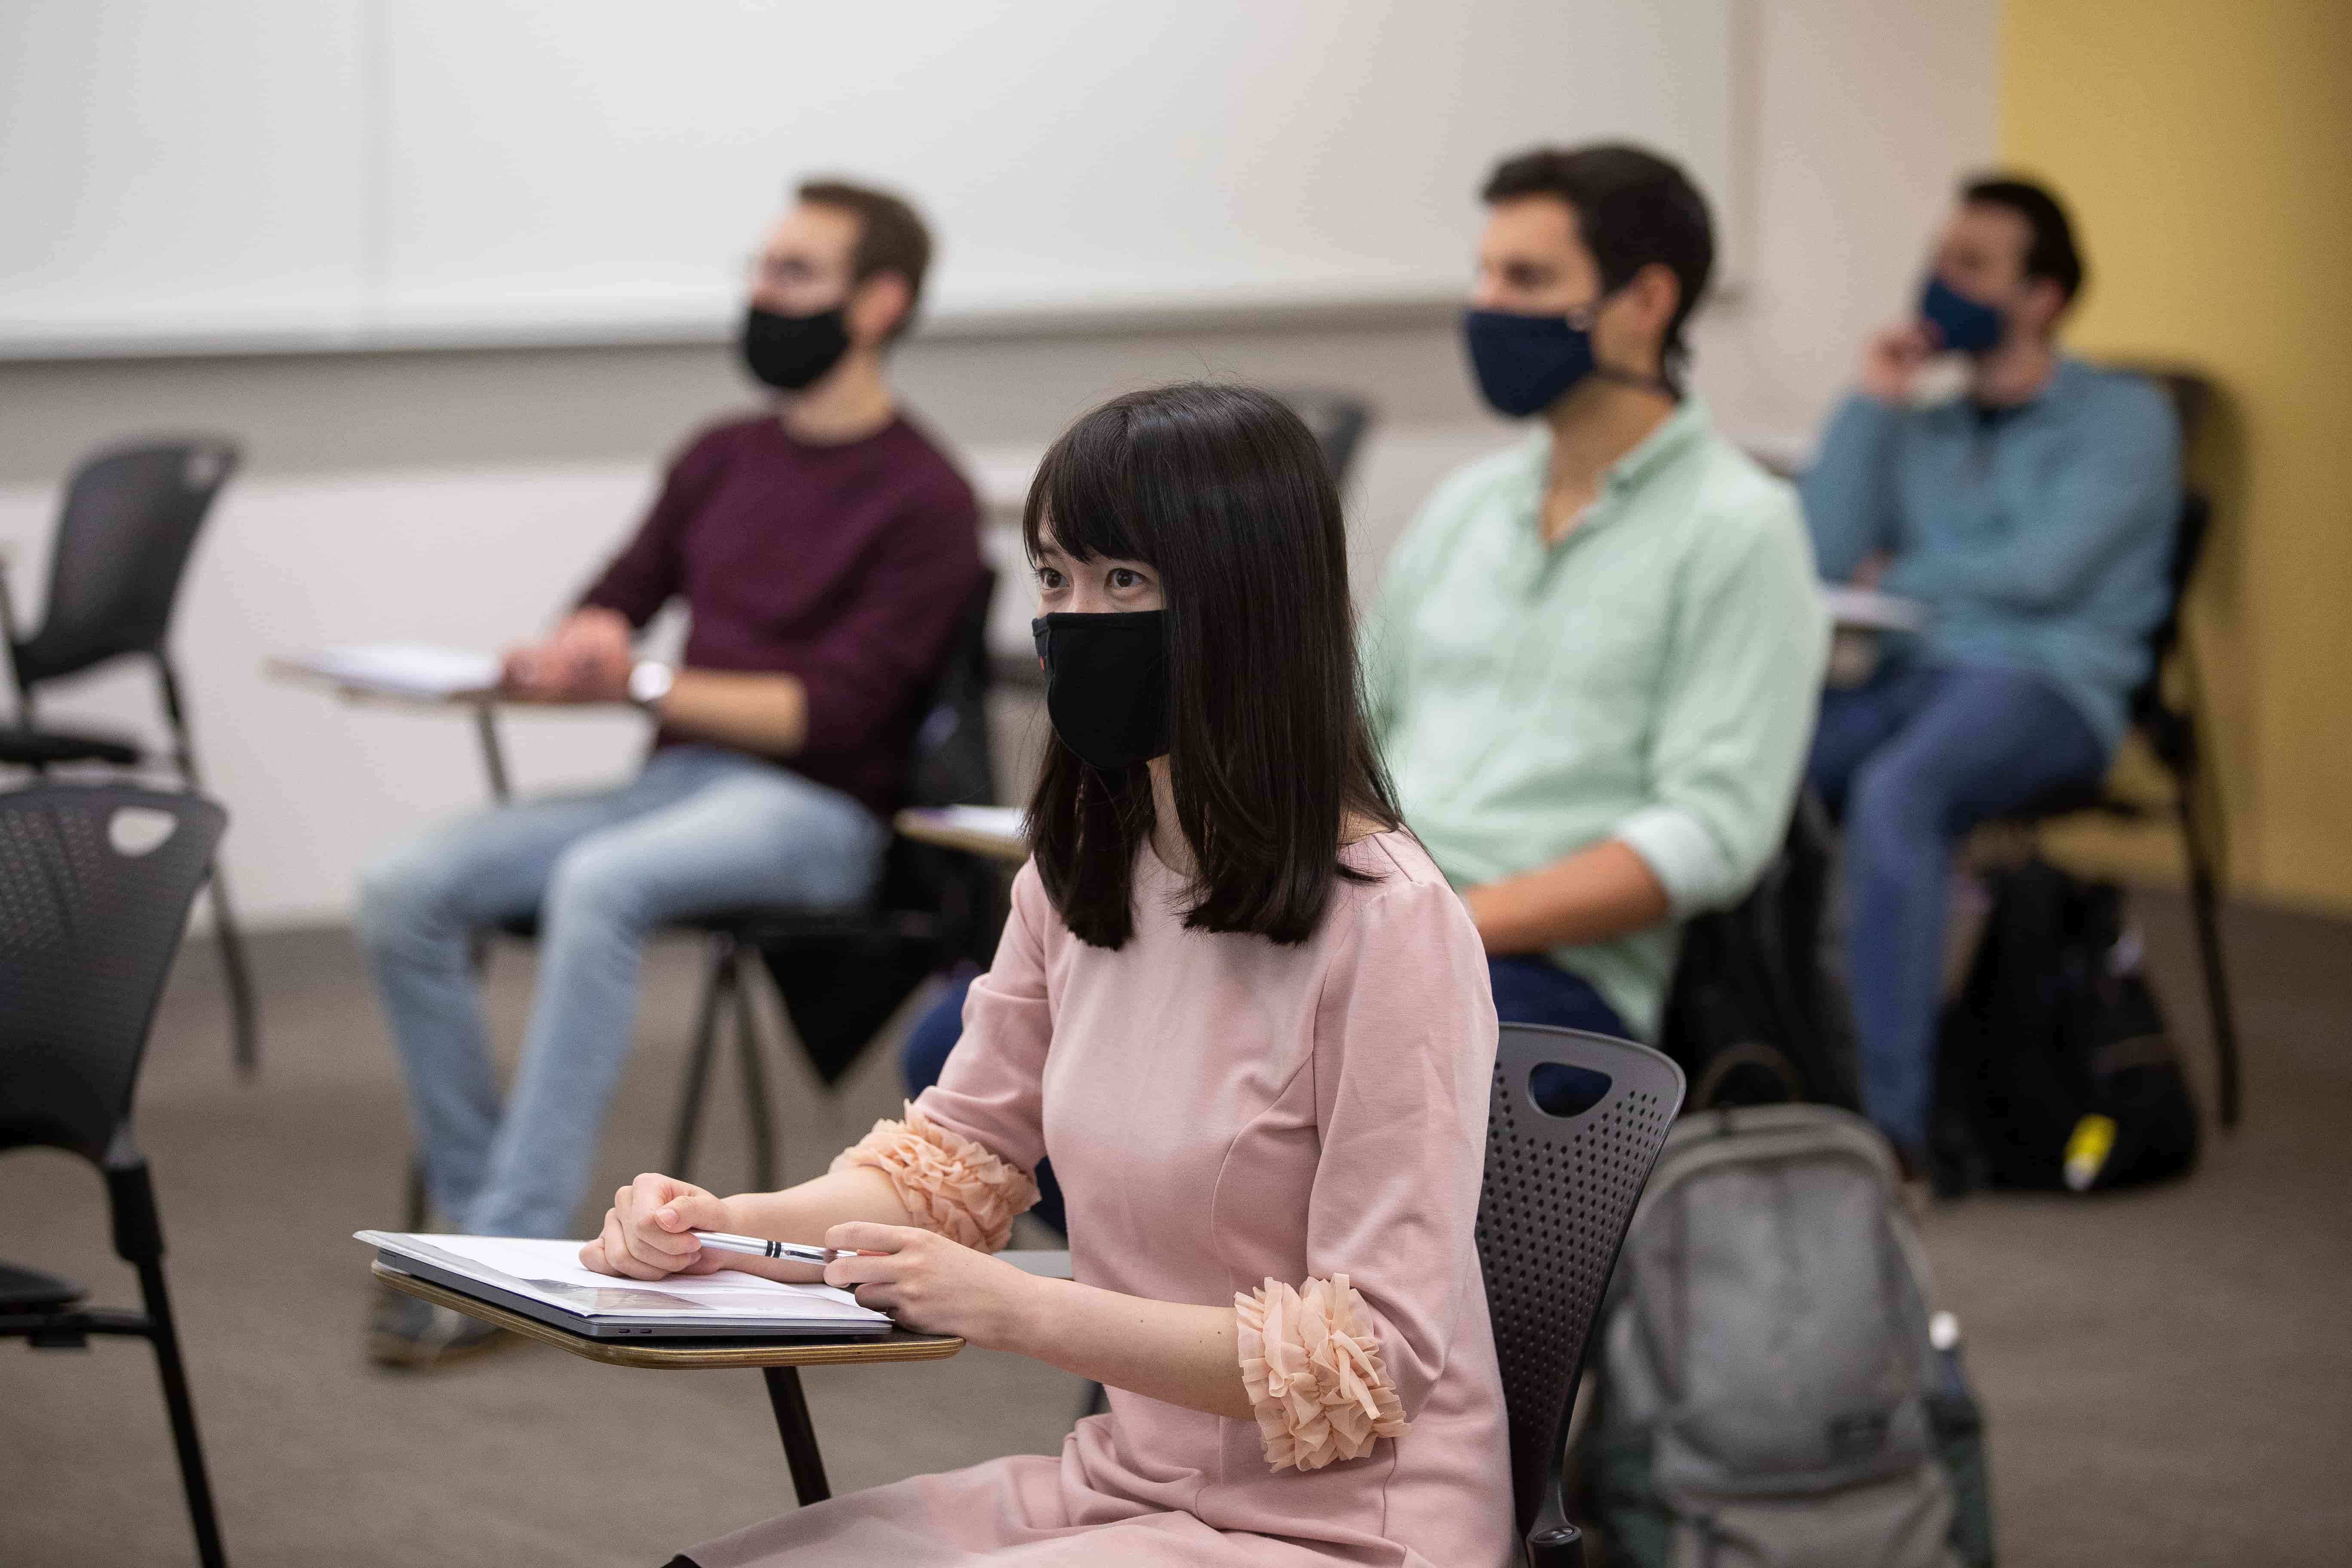 Students in a classroom wearing masks.